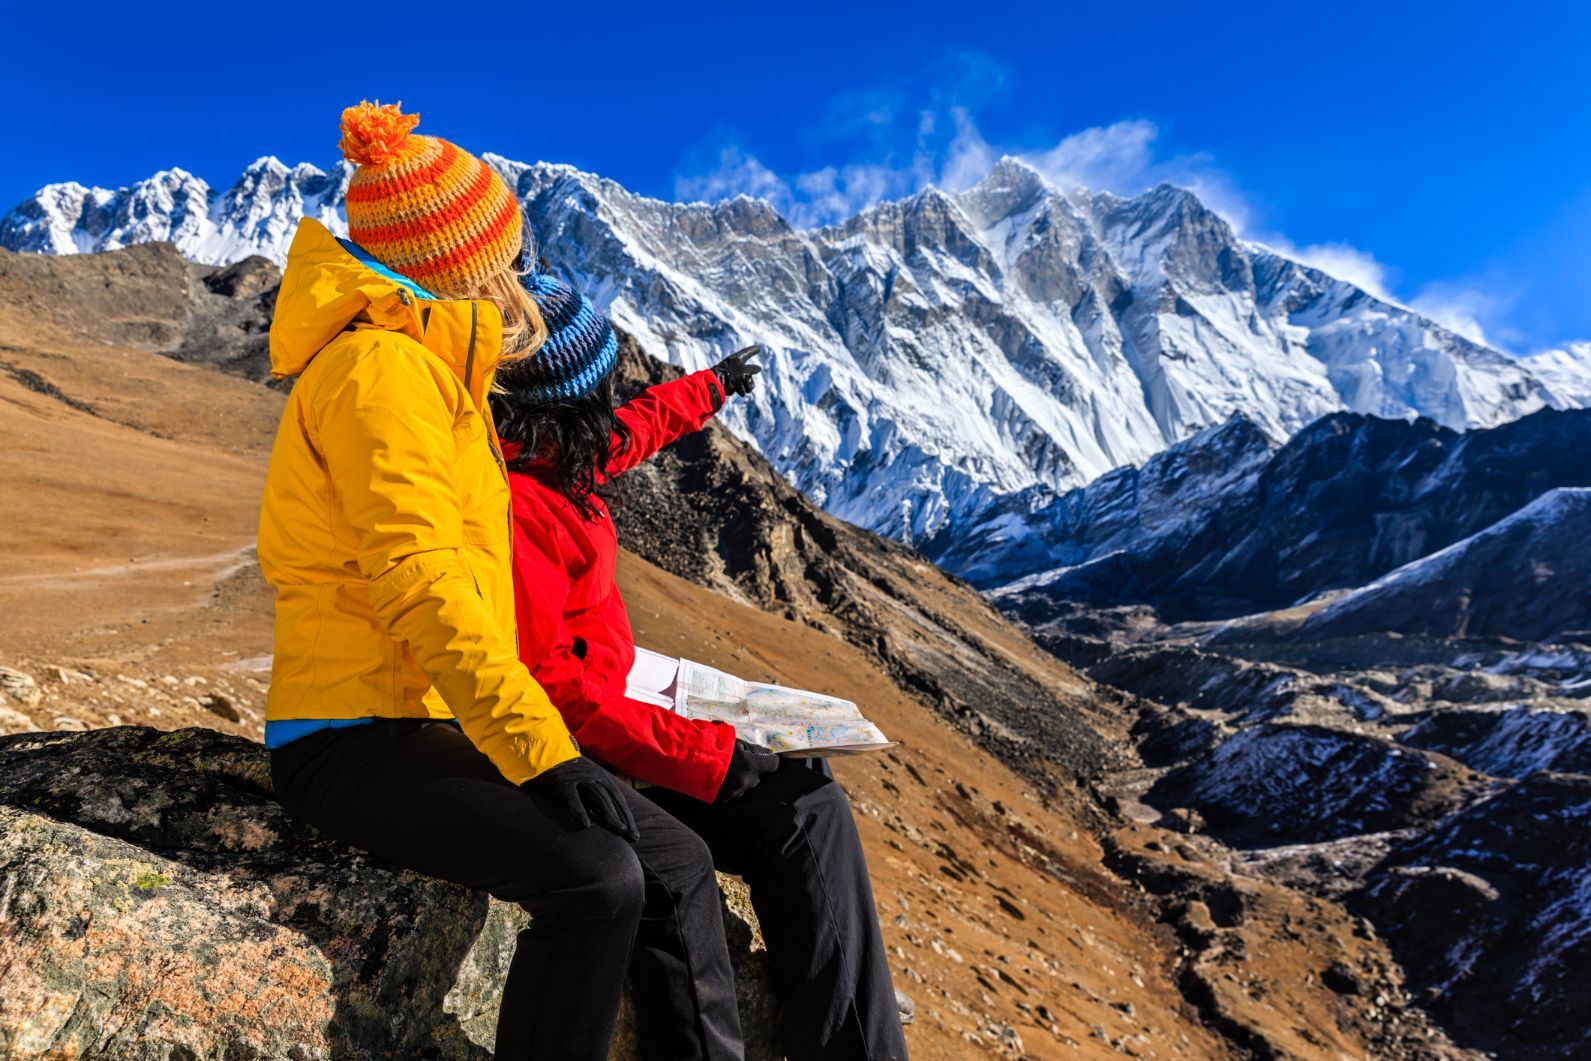 Two hikers look out on the landscape of the Everest Region in Nepal